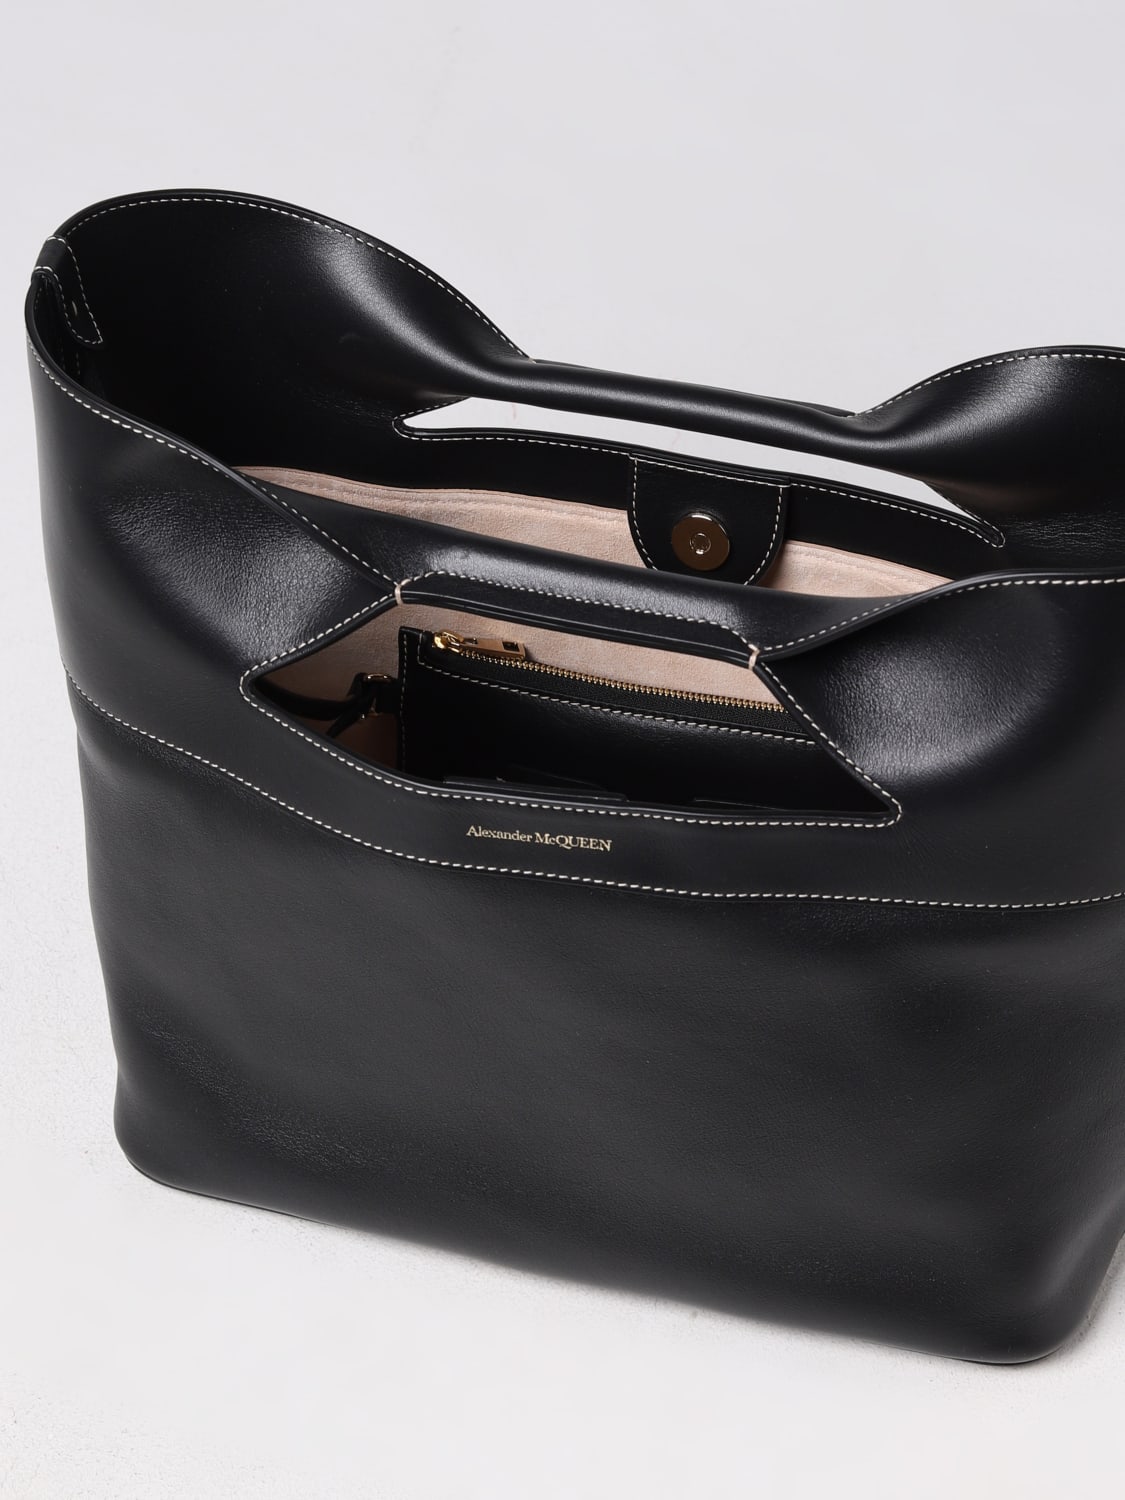 The Bow Alexander McQueen bag in leather